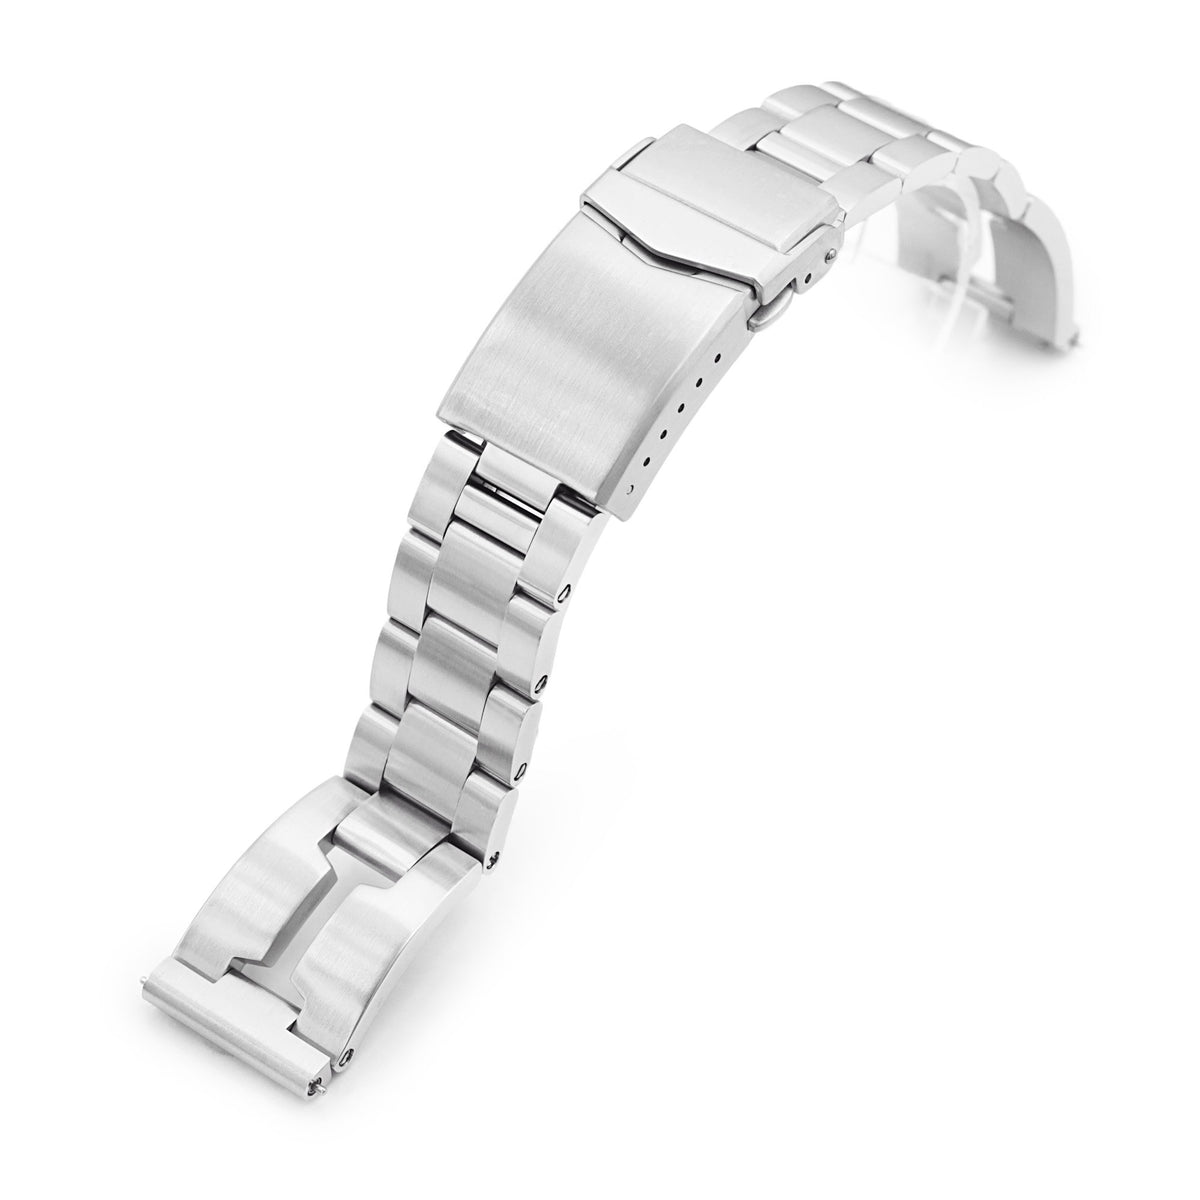 20mm Retro Razor QR Watch Band Straight End Quick Release, 316L Stainless Steel Brushed V-Clasp Strapcode Watch Bands